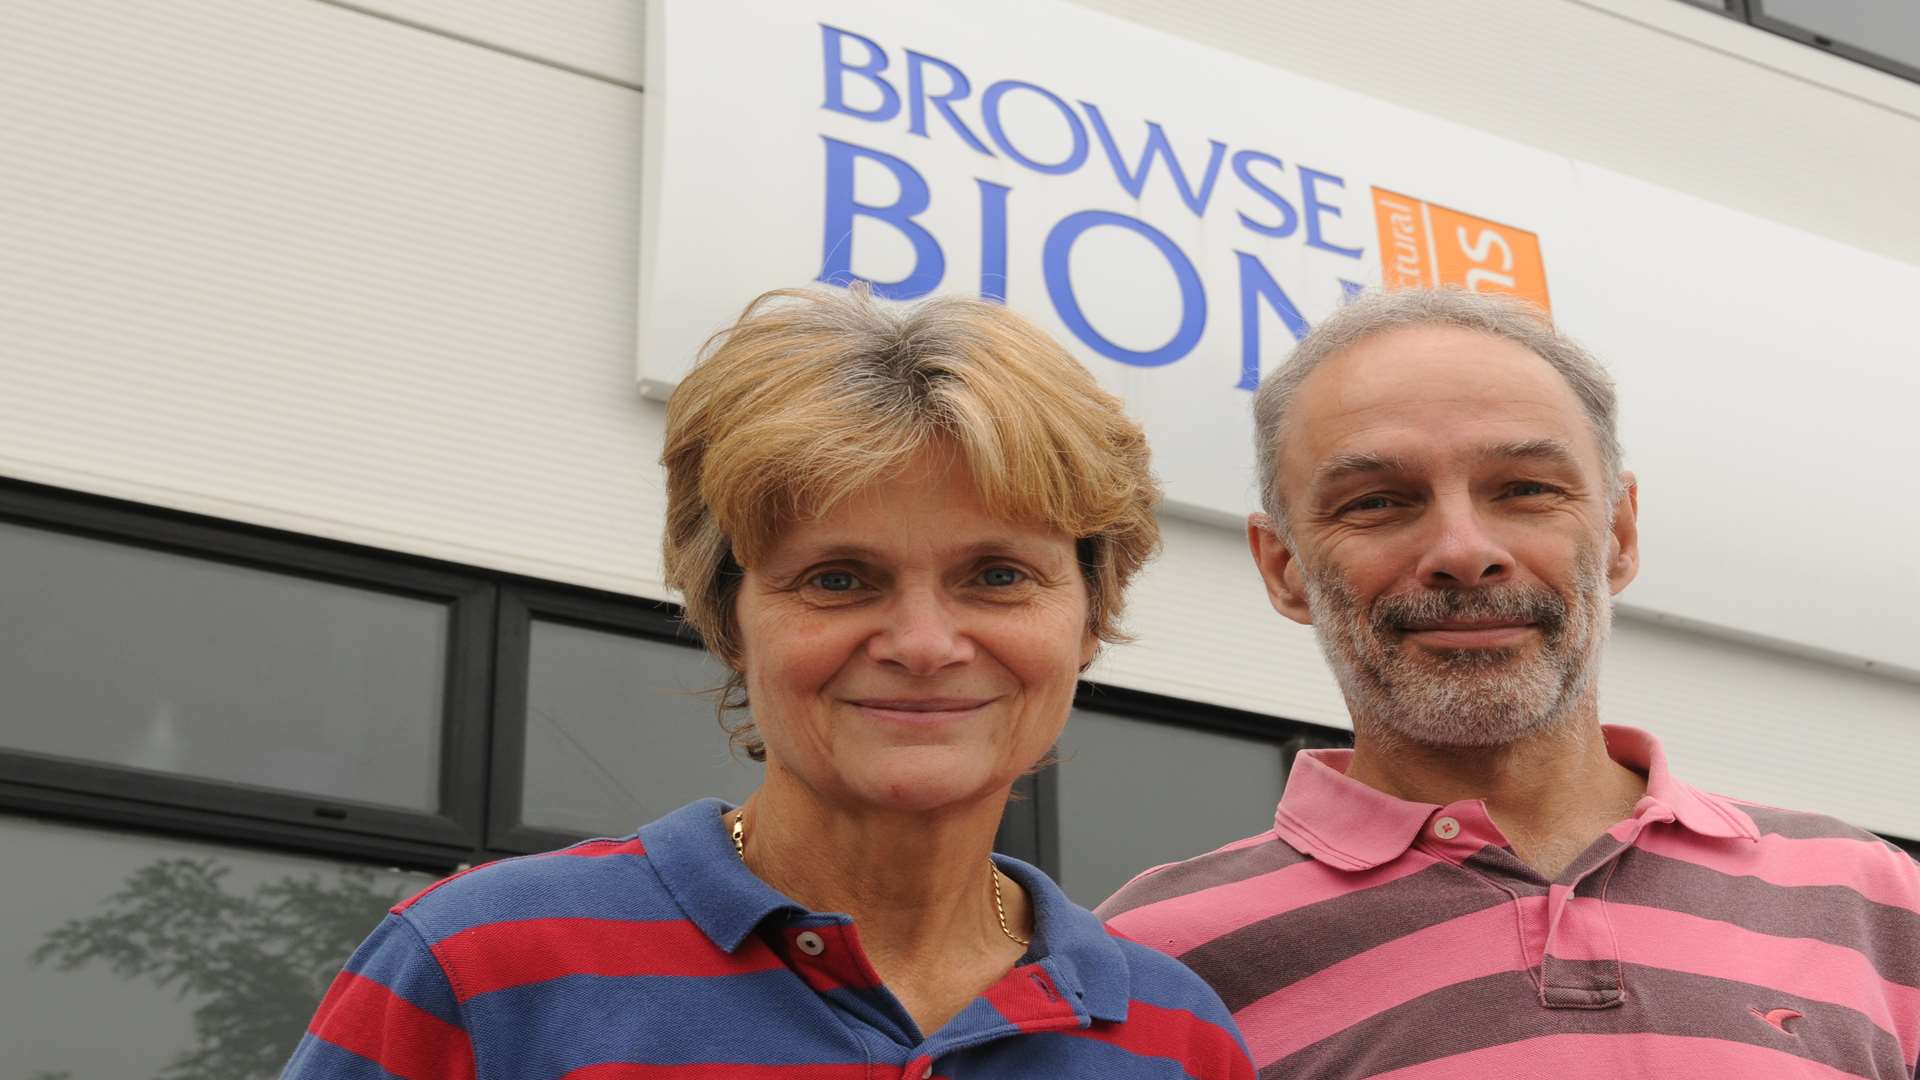 Signmakers Jon and Sheila Browse at Browse Bion